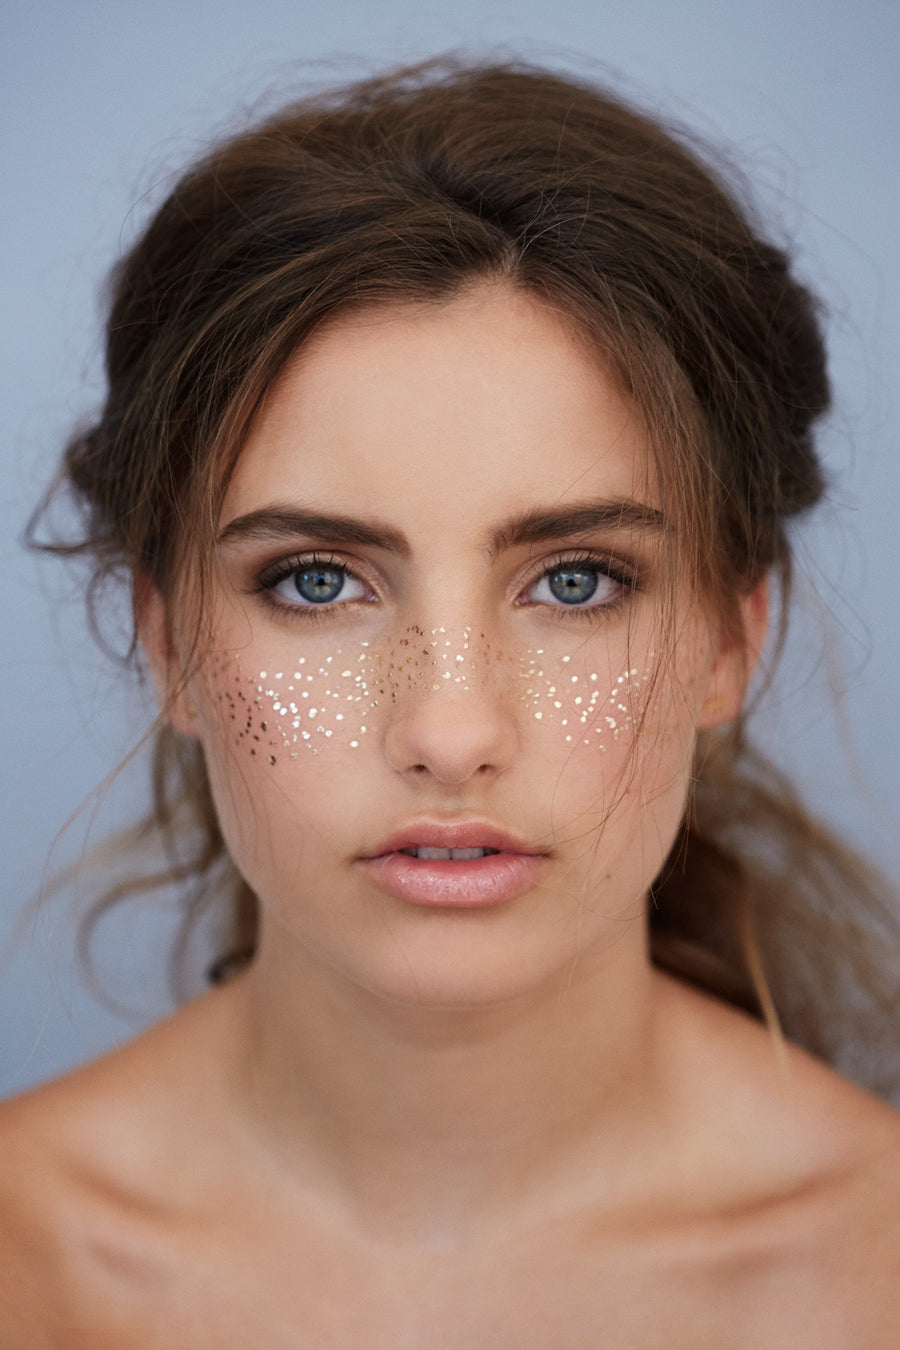 BeautyMarks "The New Makeup" - Freckles